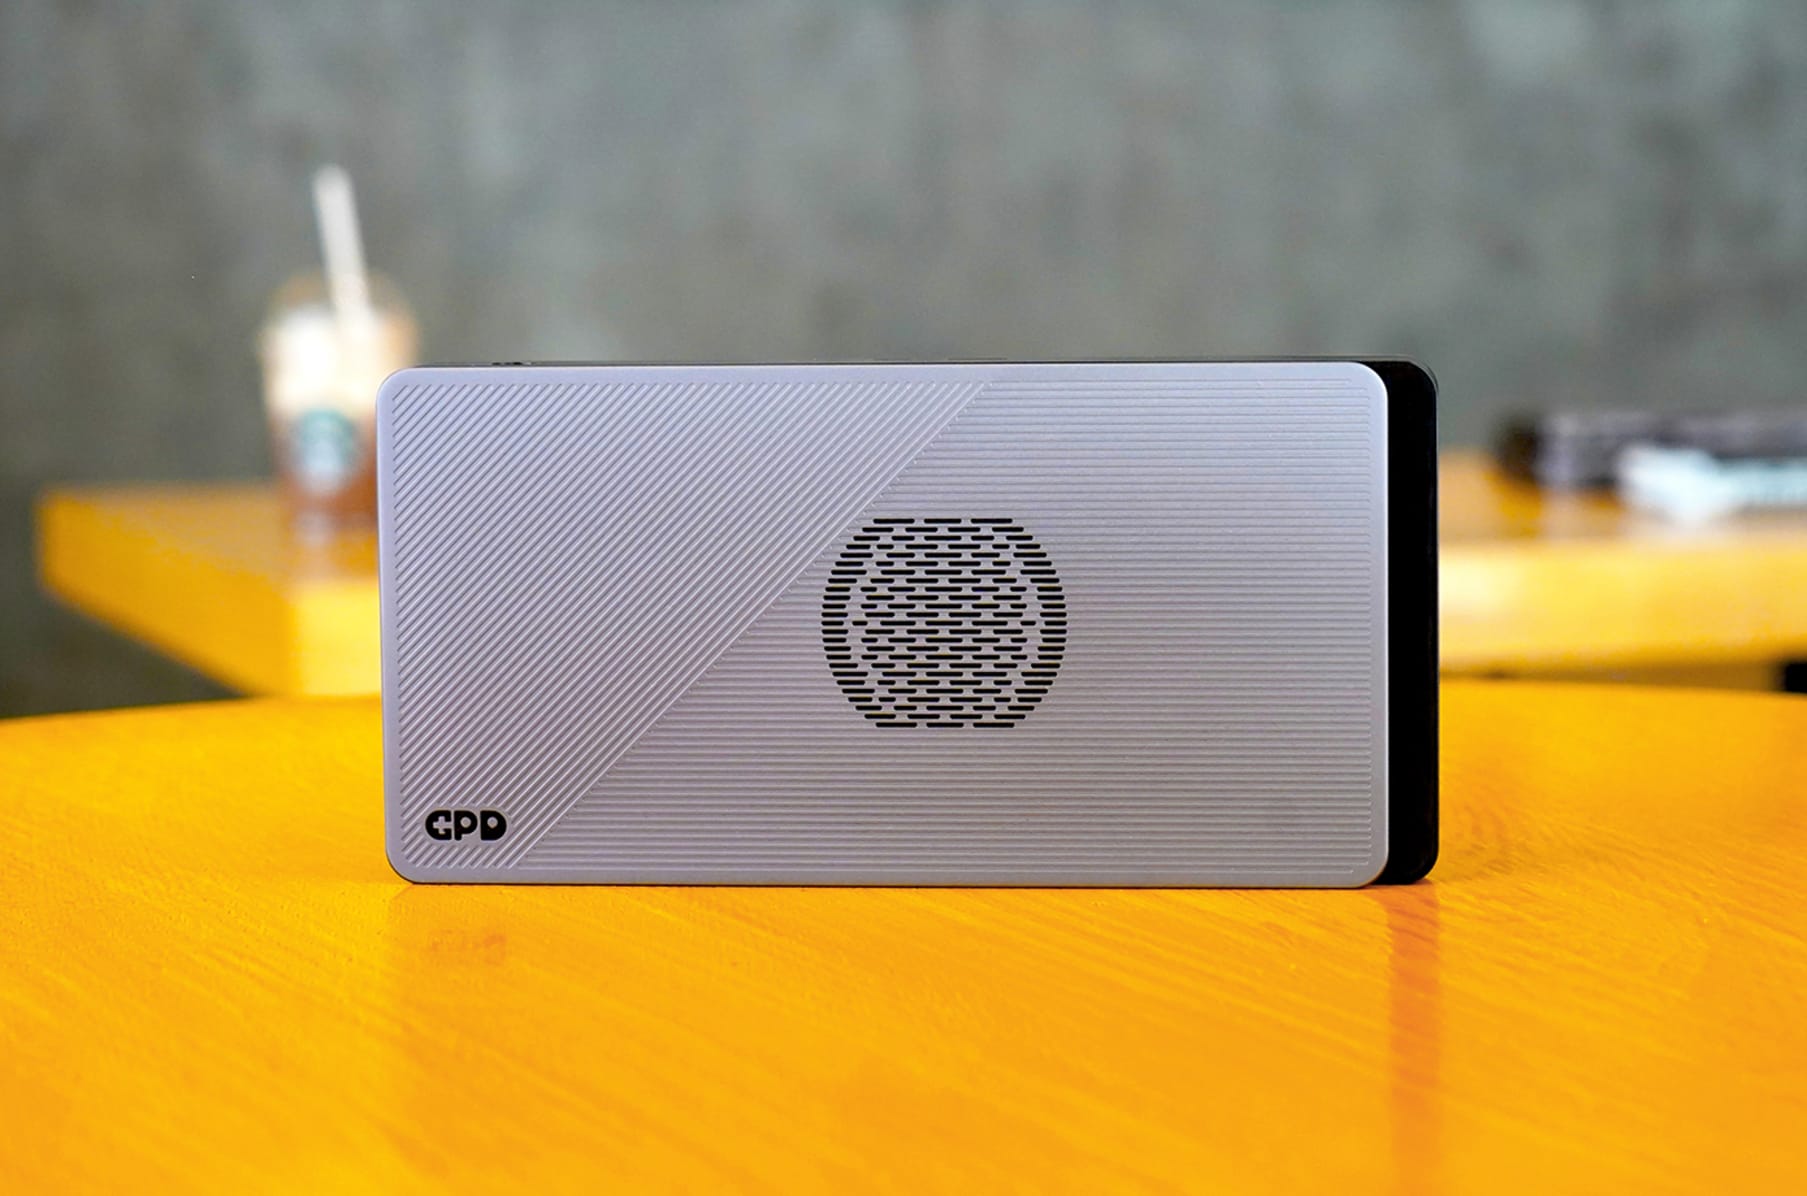 GPD G1 Portable eGPU - All we know about this high performance